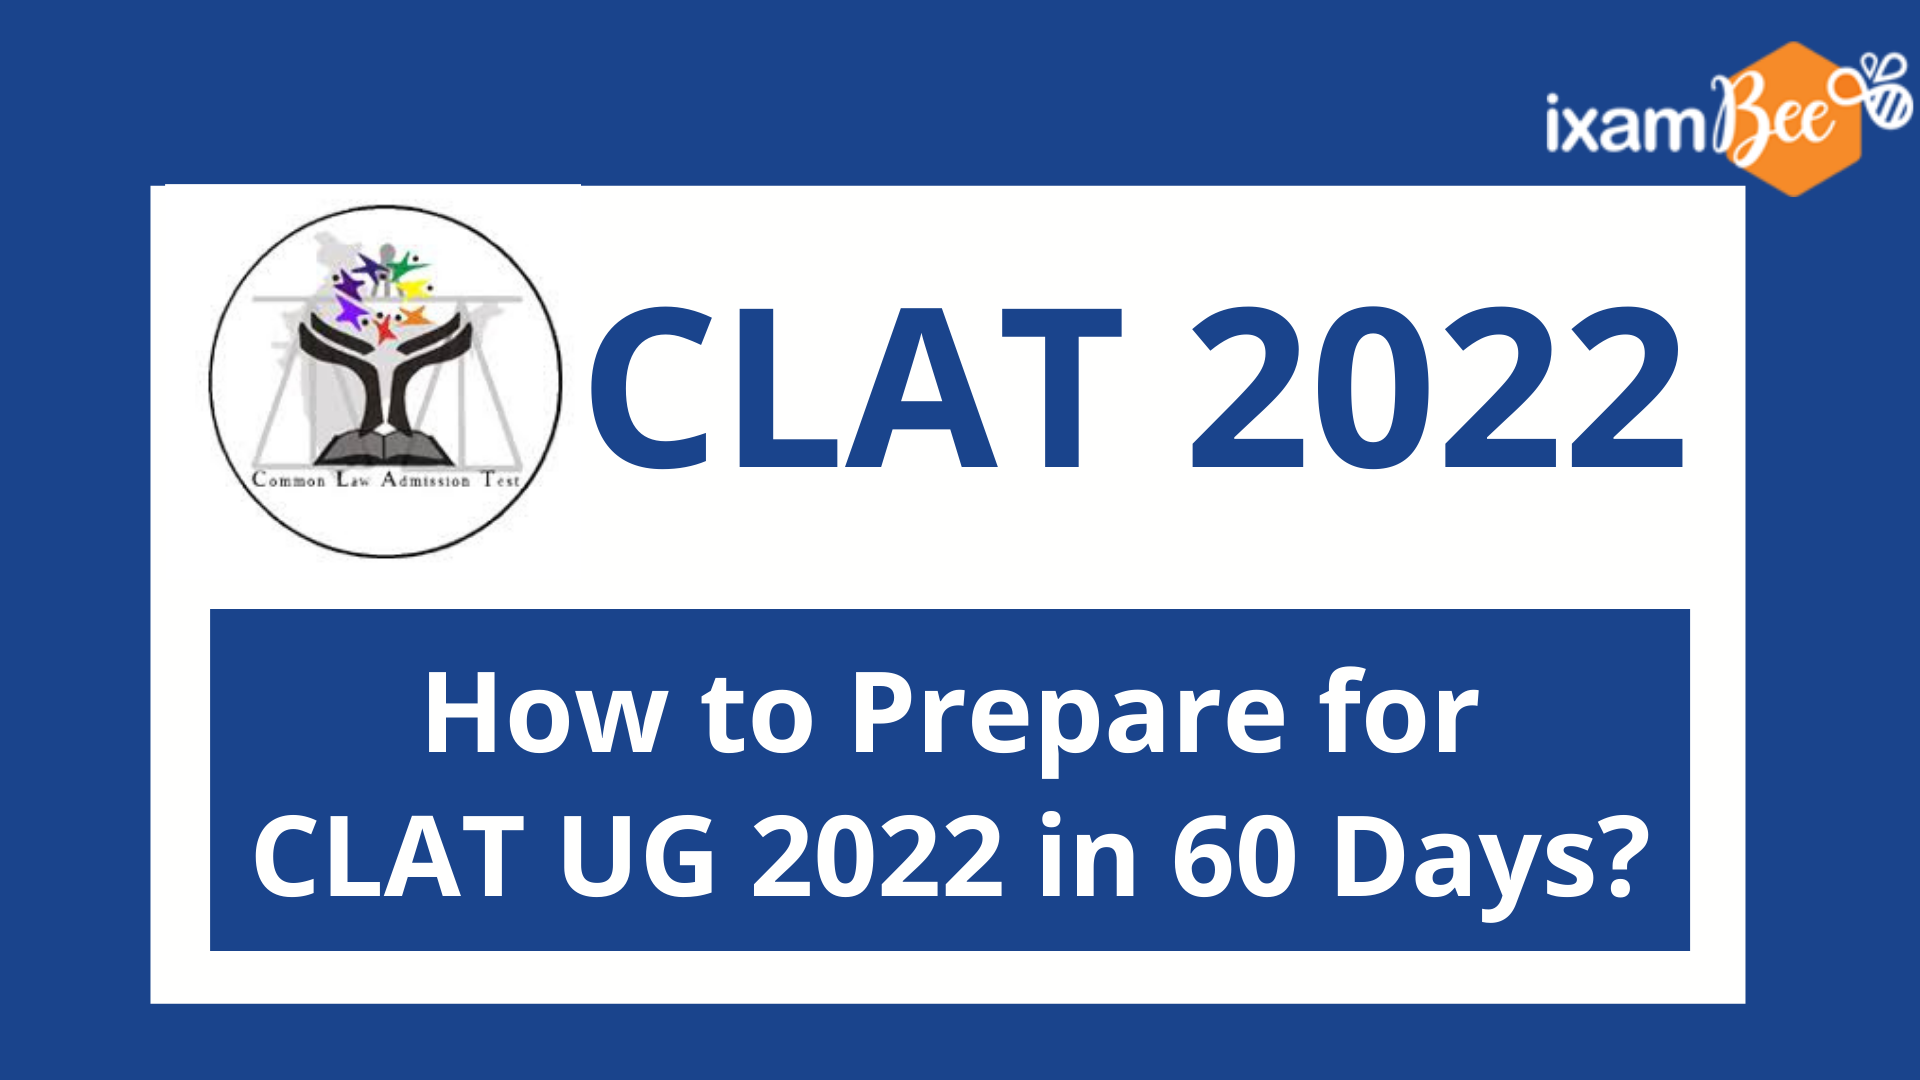 CLAT 2022: How to Prepare for CLAT UG 2022 in 60 Days?